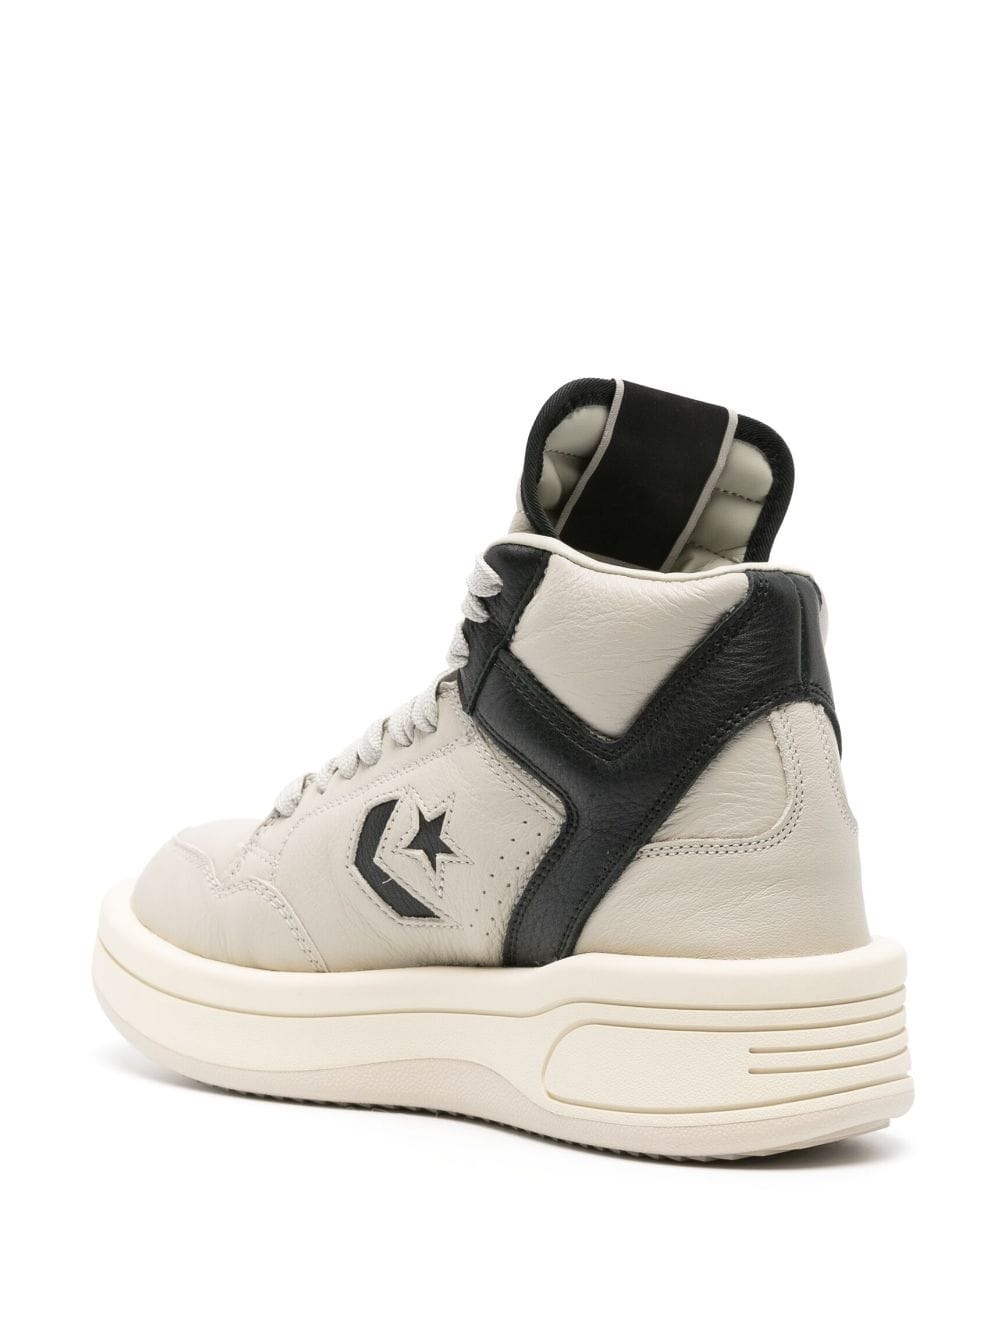 x Converse TurboWpn leather sneakers - 3